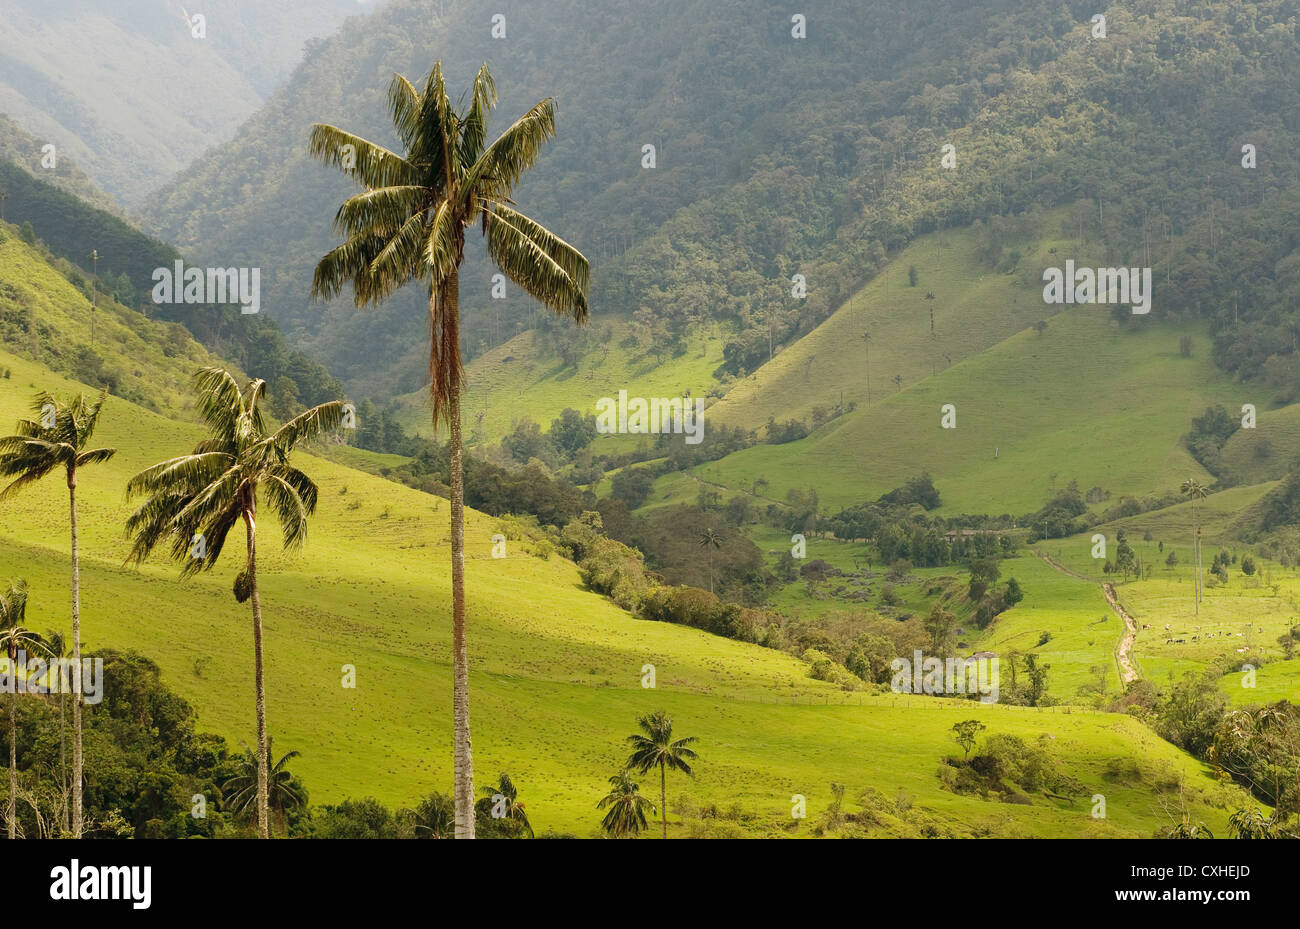 Vax palm trees of Cocora Valley, colombia Stock Photo